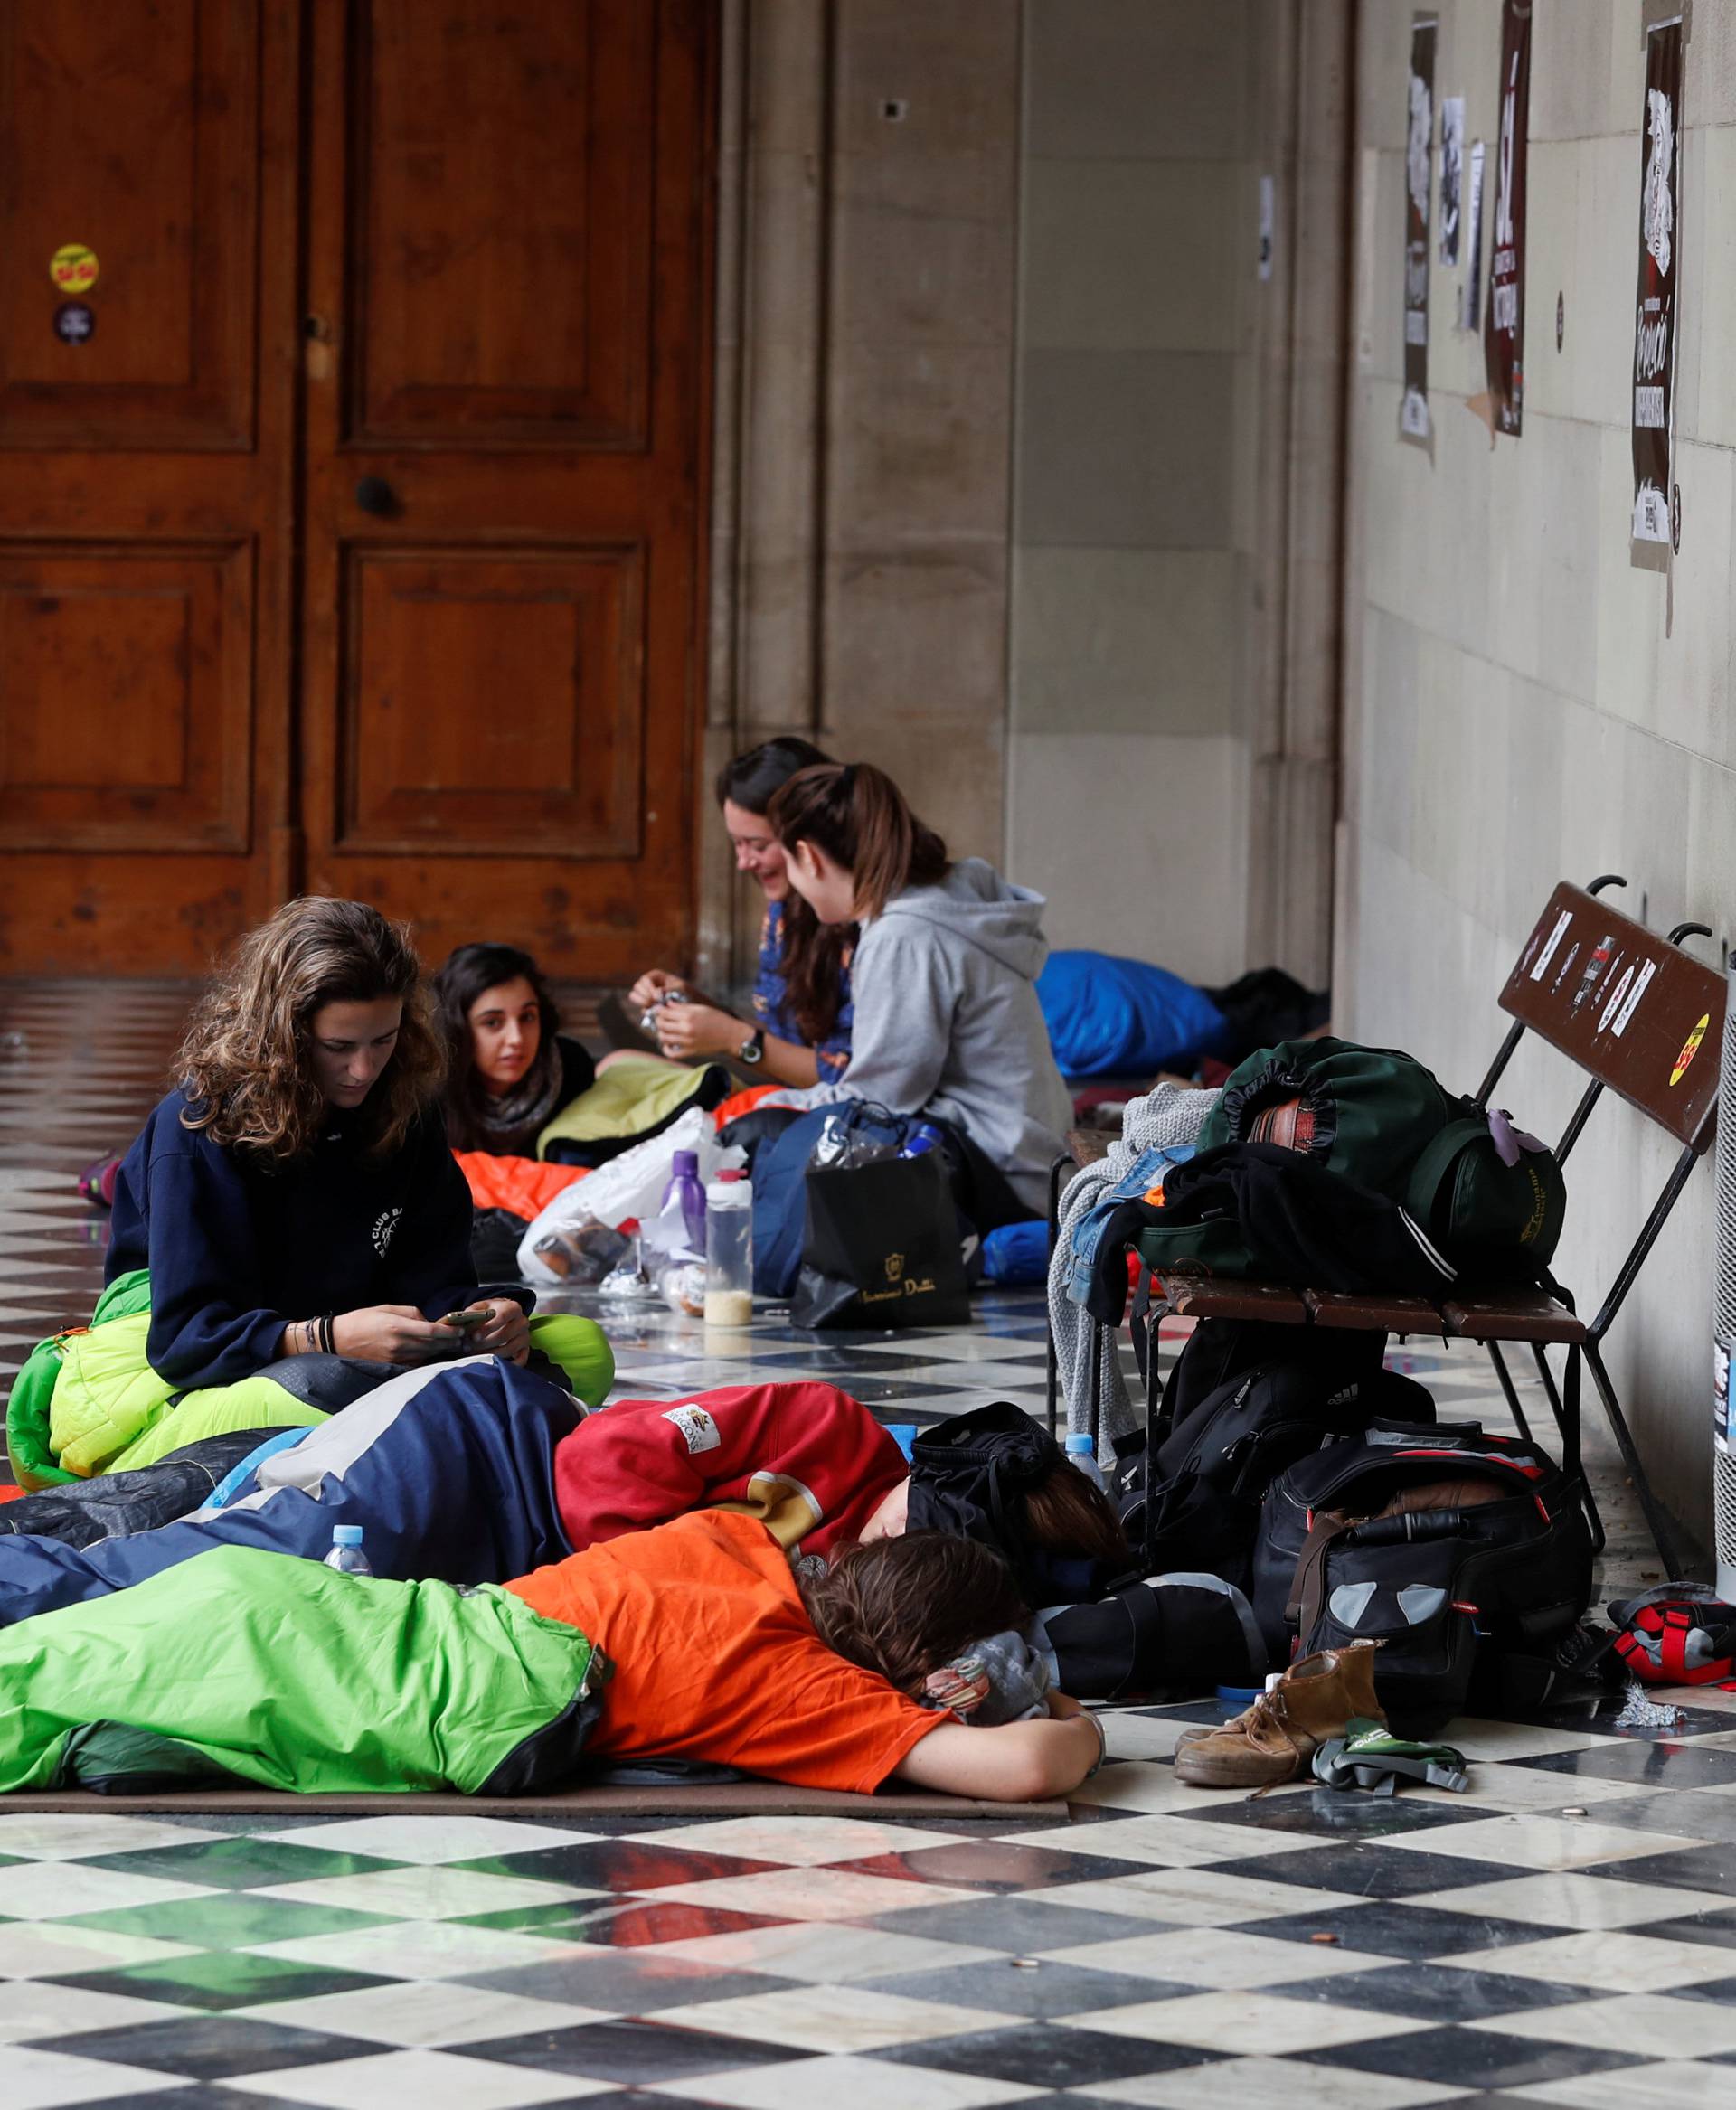 People wake up after speding the night inside the University of Barcelona's historic building during a protest in favour of the banned October 1 independence referendum, in Barcelona